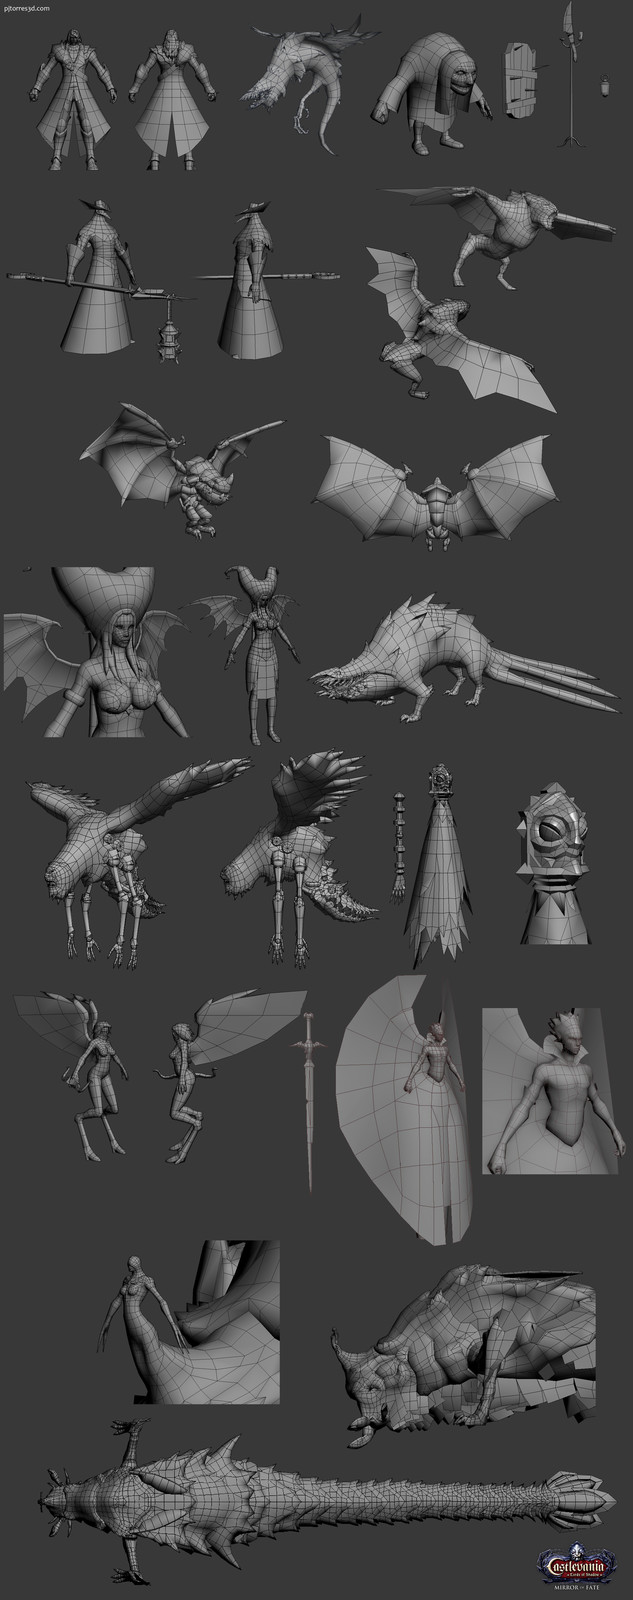 Some low meshes of characters I did